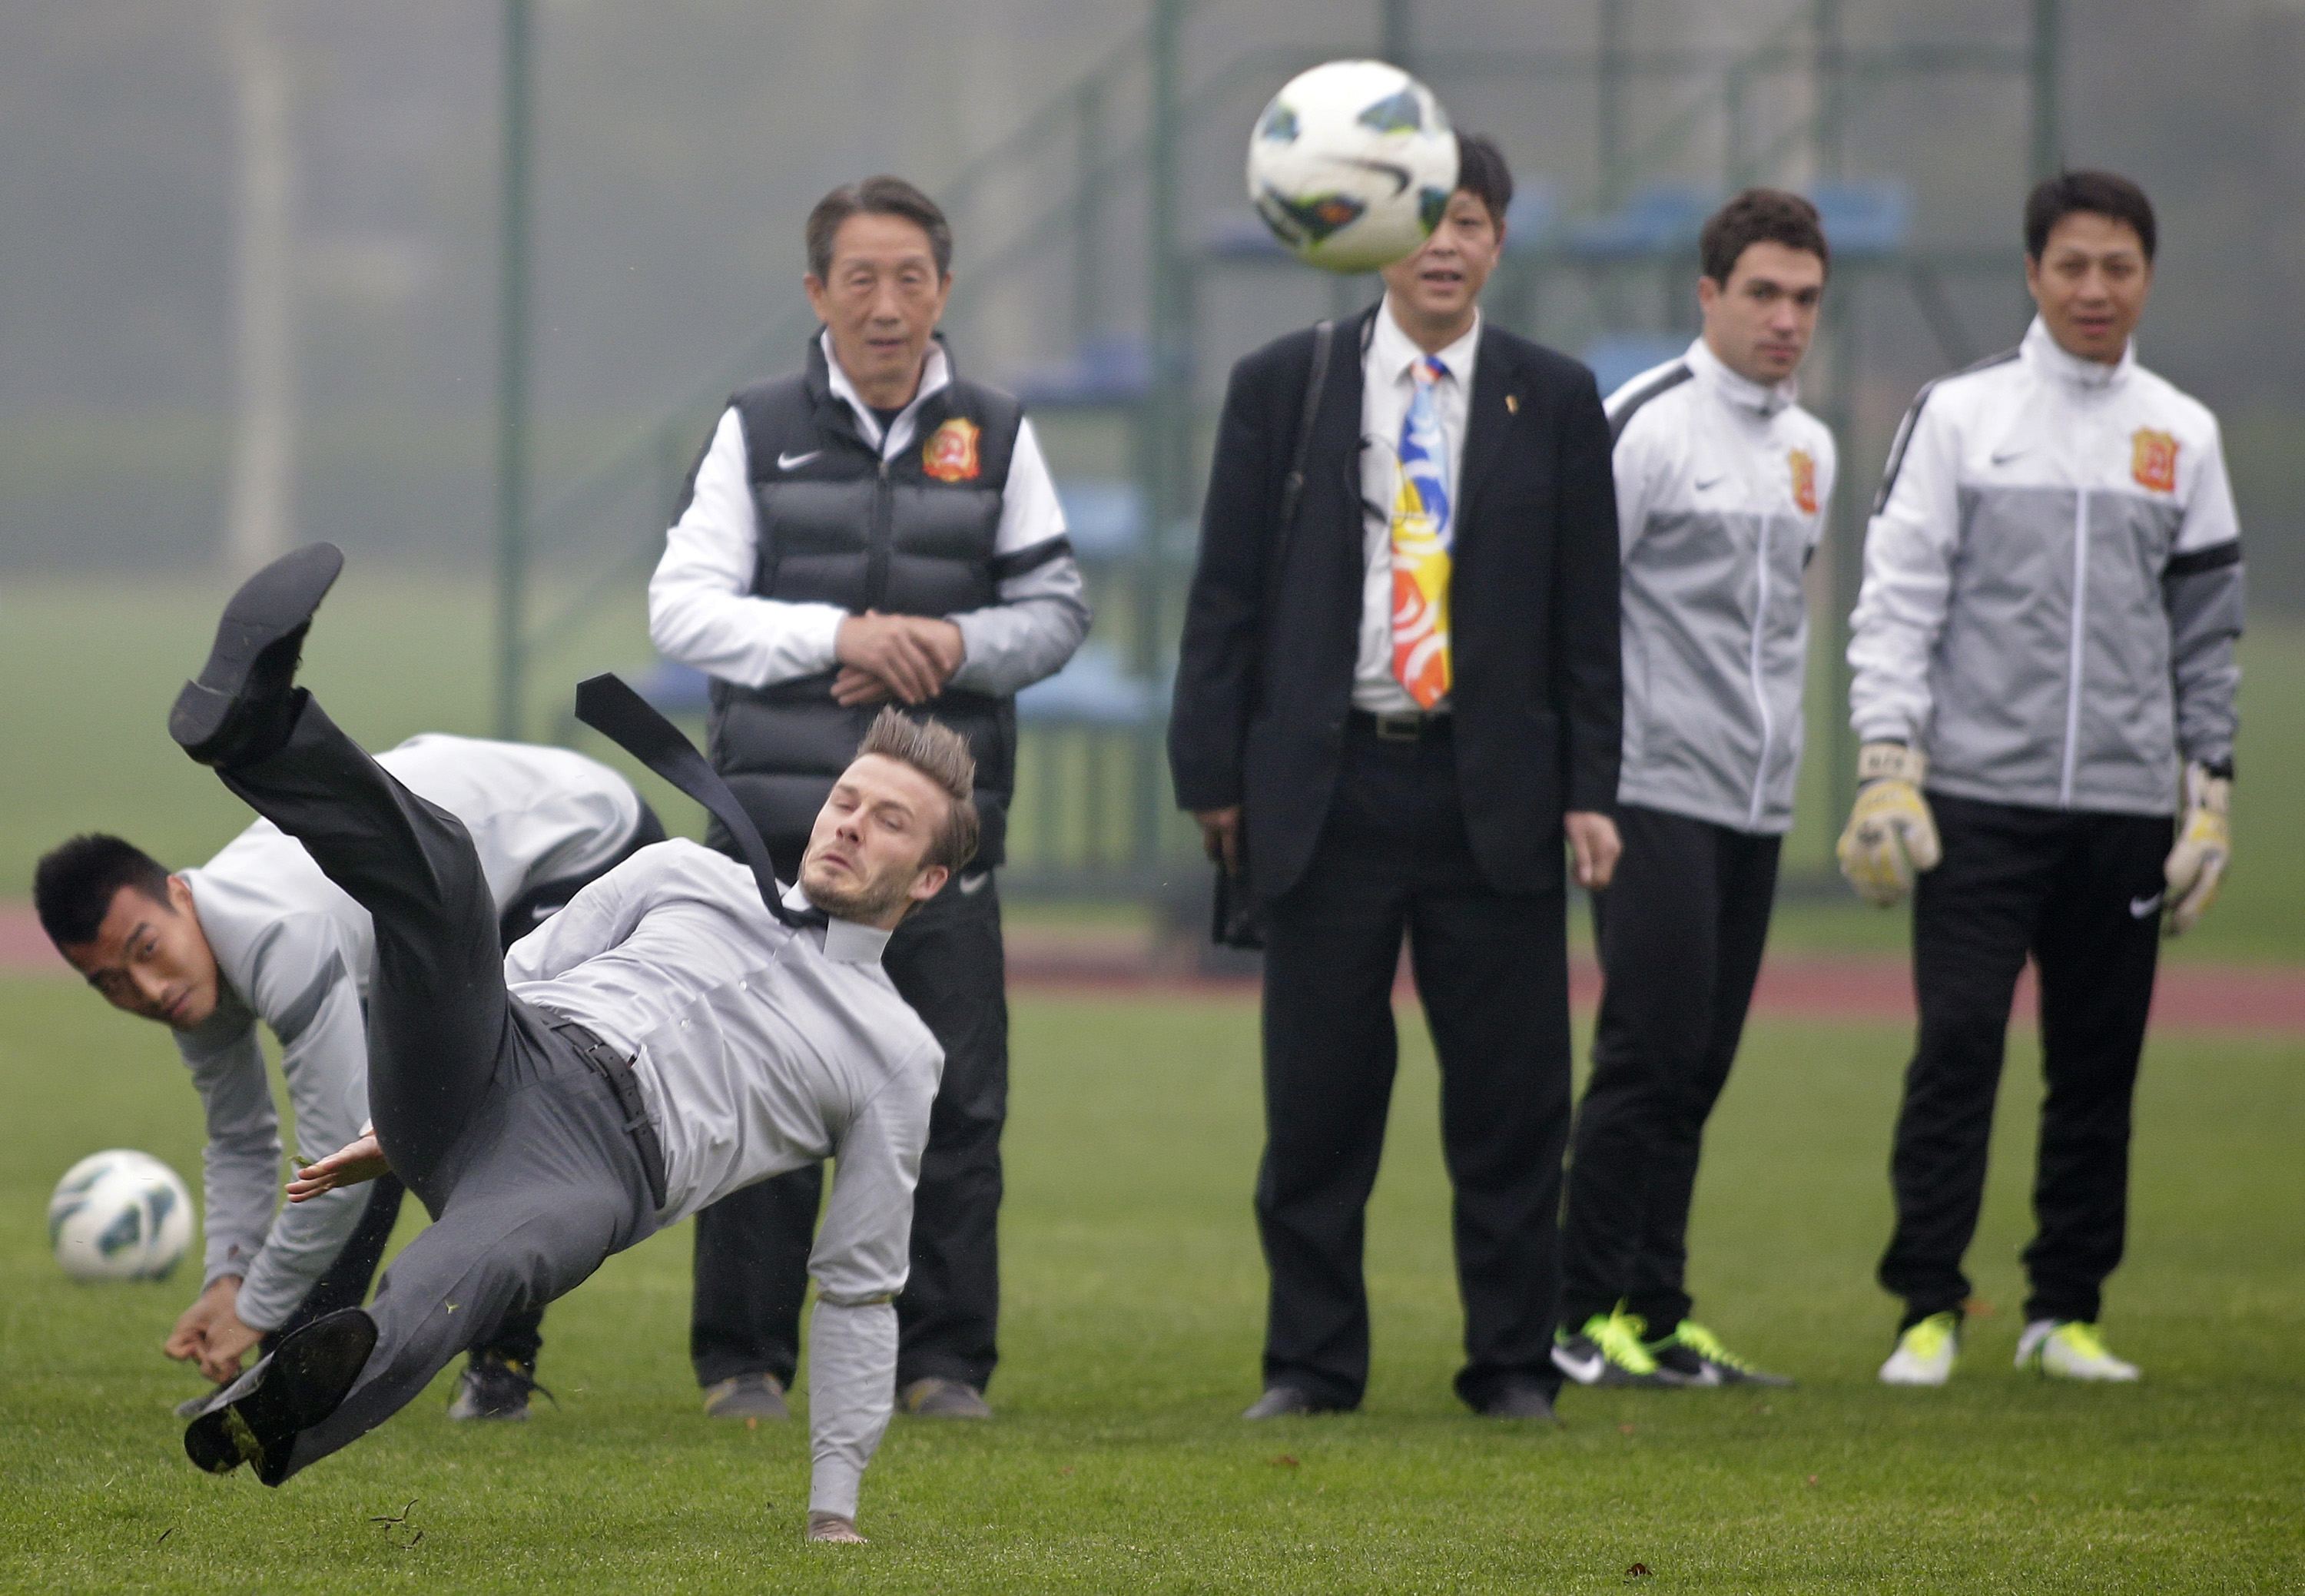 David Beckham slips as he free kicks at a sports field during his visit in Wuhan, Hubei province